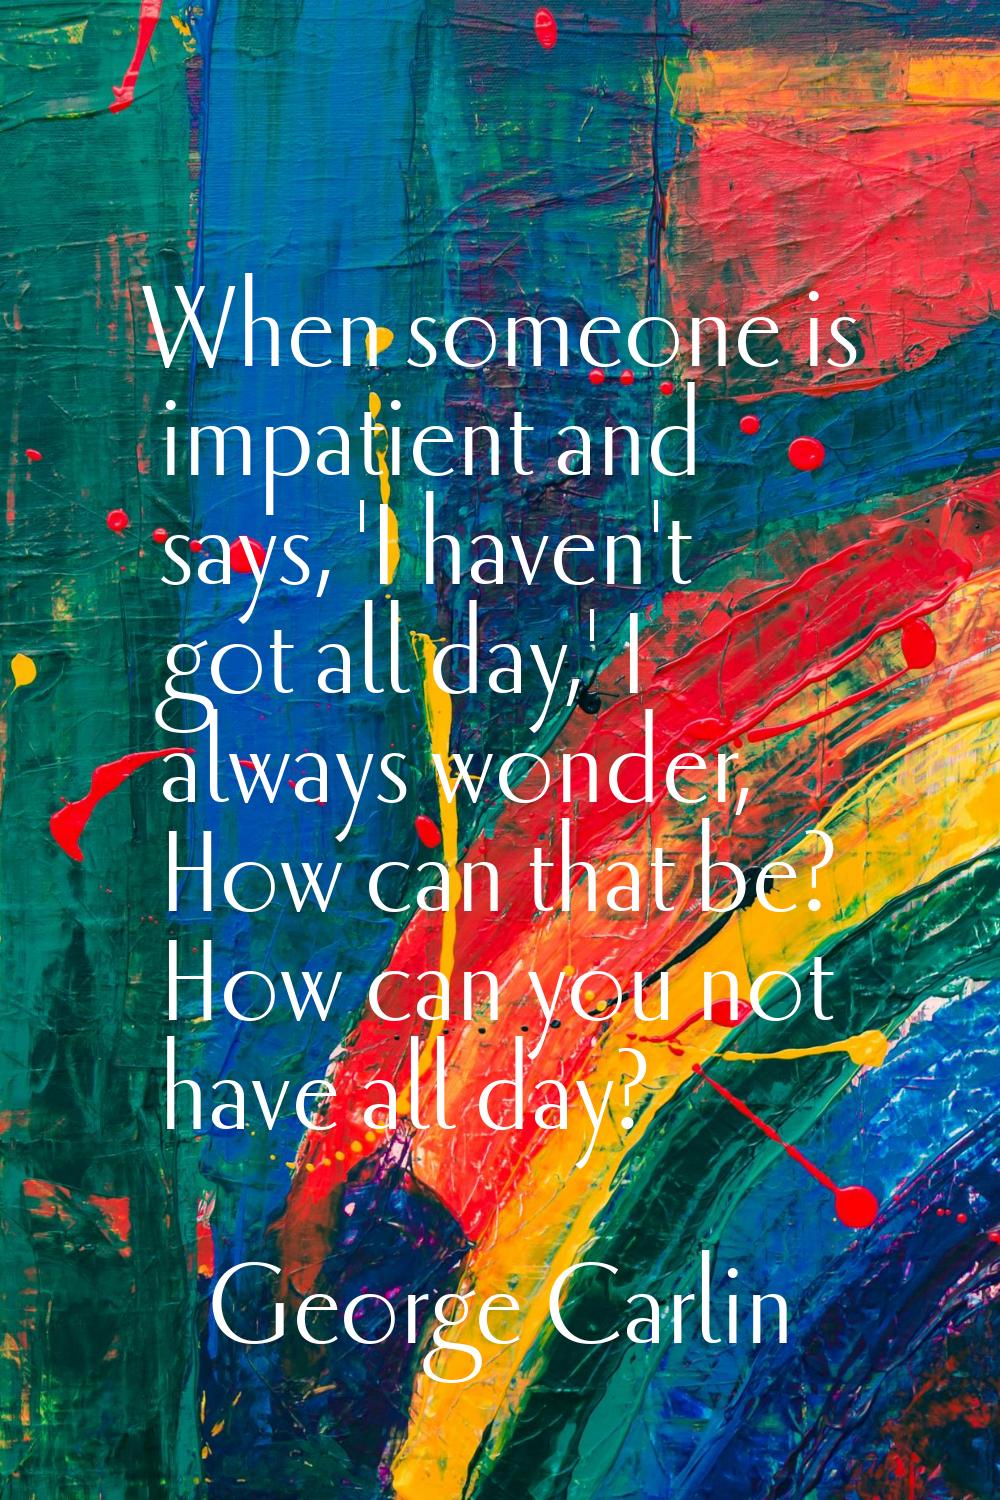 When someone is impatient and says, 'I haven't got all day,' I always wonder, How can that be? How 